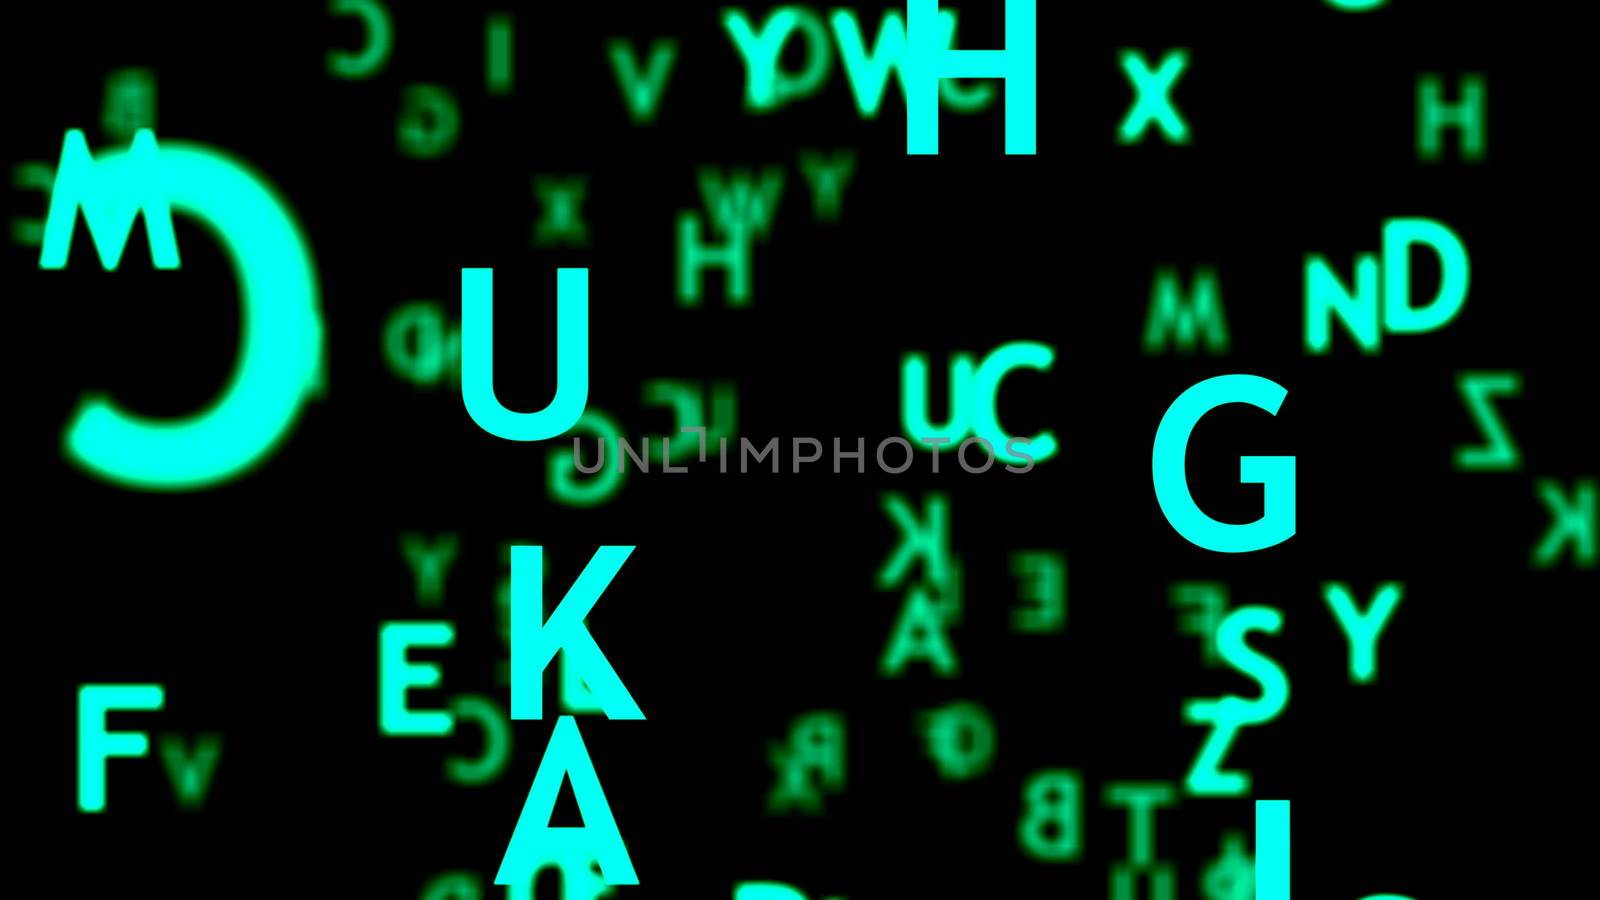 Abstract background with letters by nolimit046